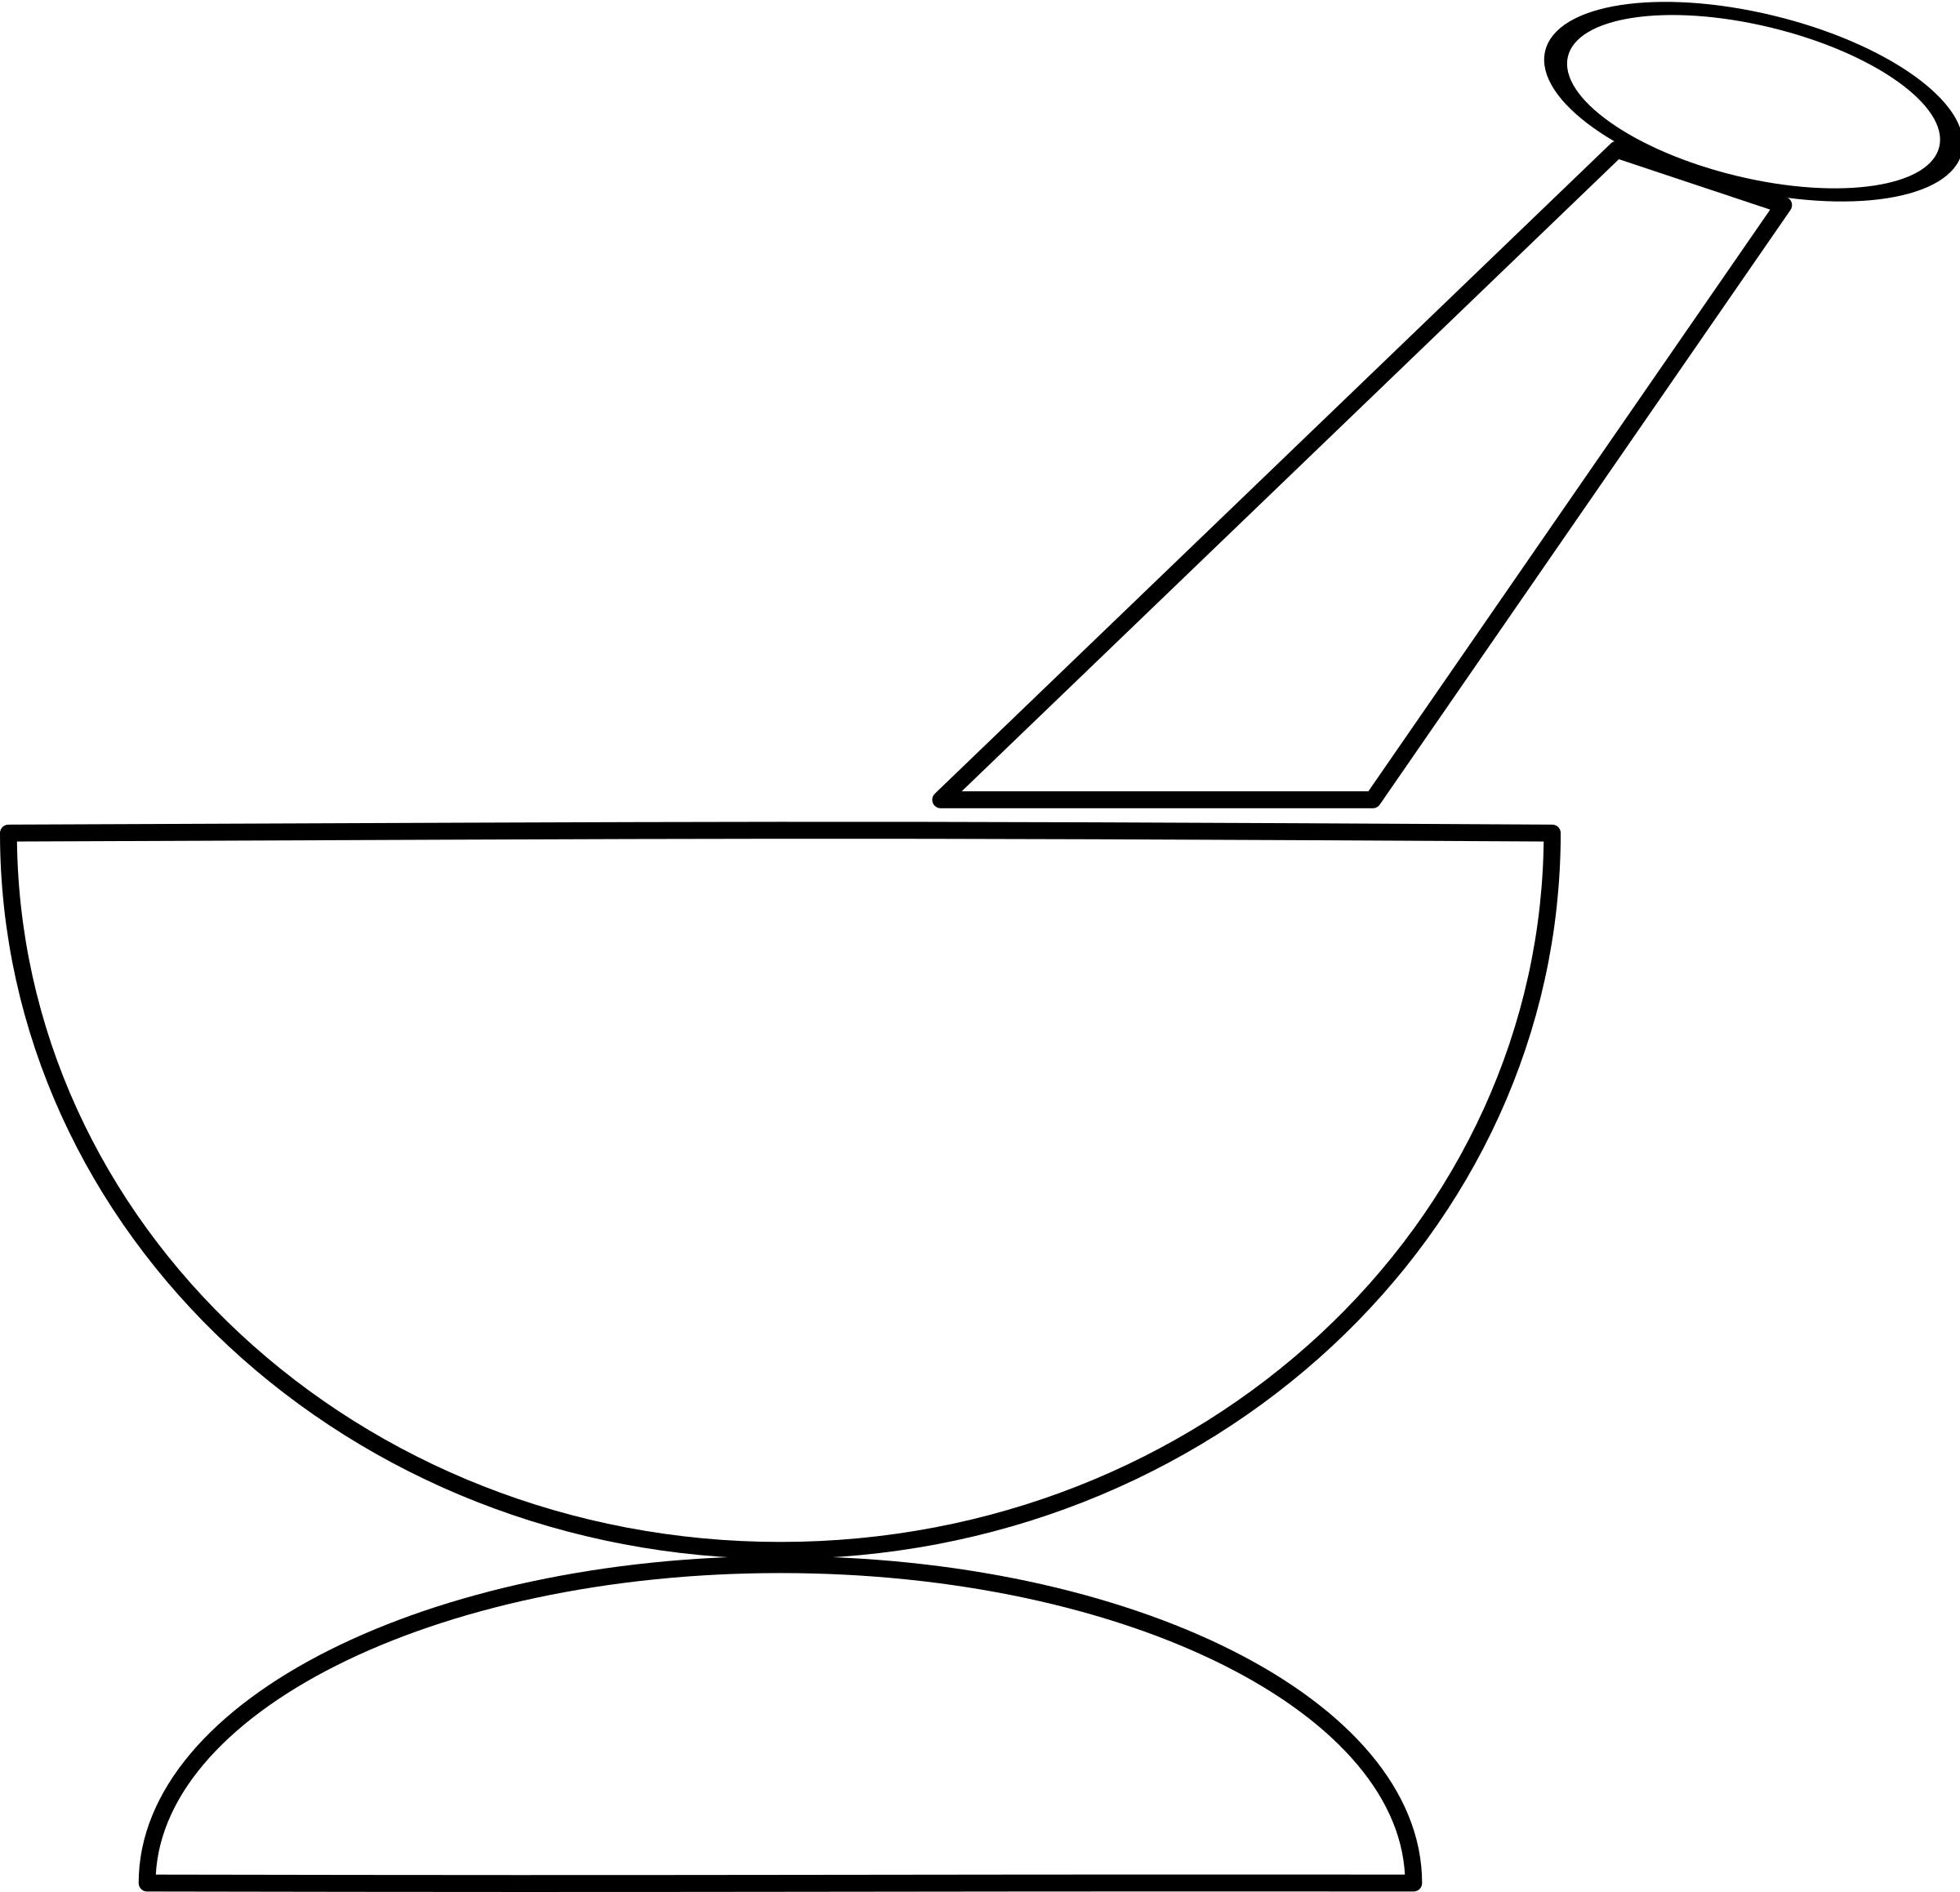 Mortar and Pestle icons